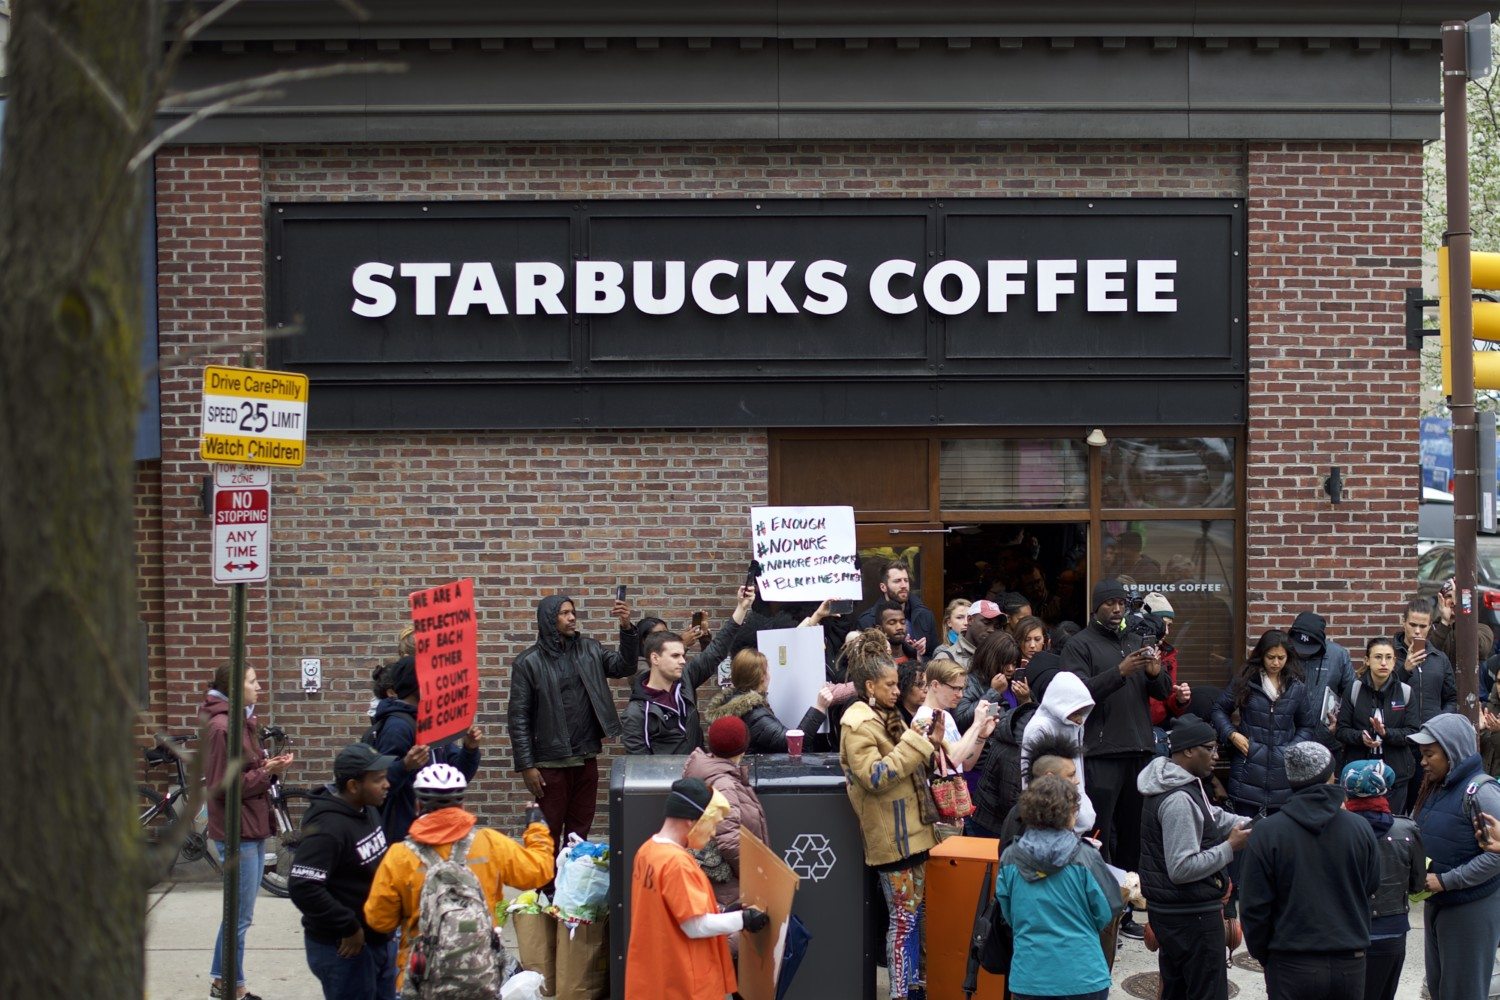 Philadelphia Police Arrest Of Two Black Men In Starbucks, Prompts Apology From Company's CEO